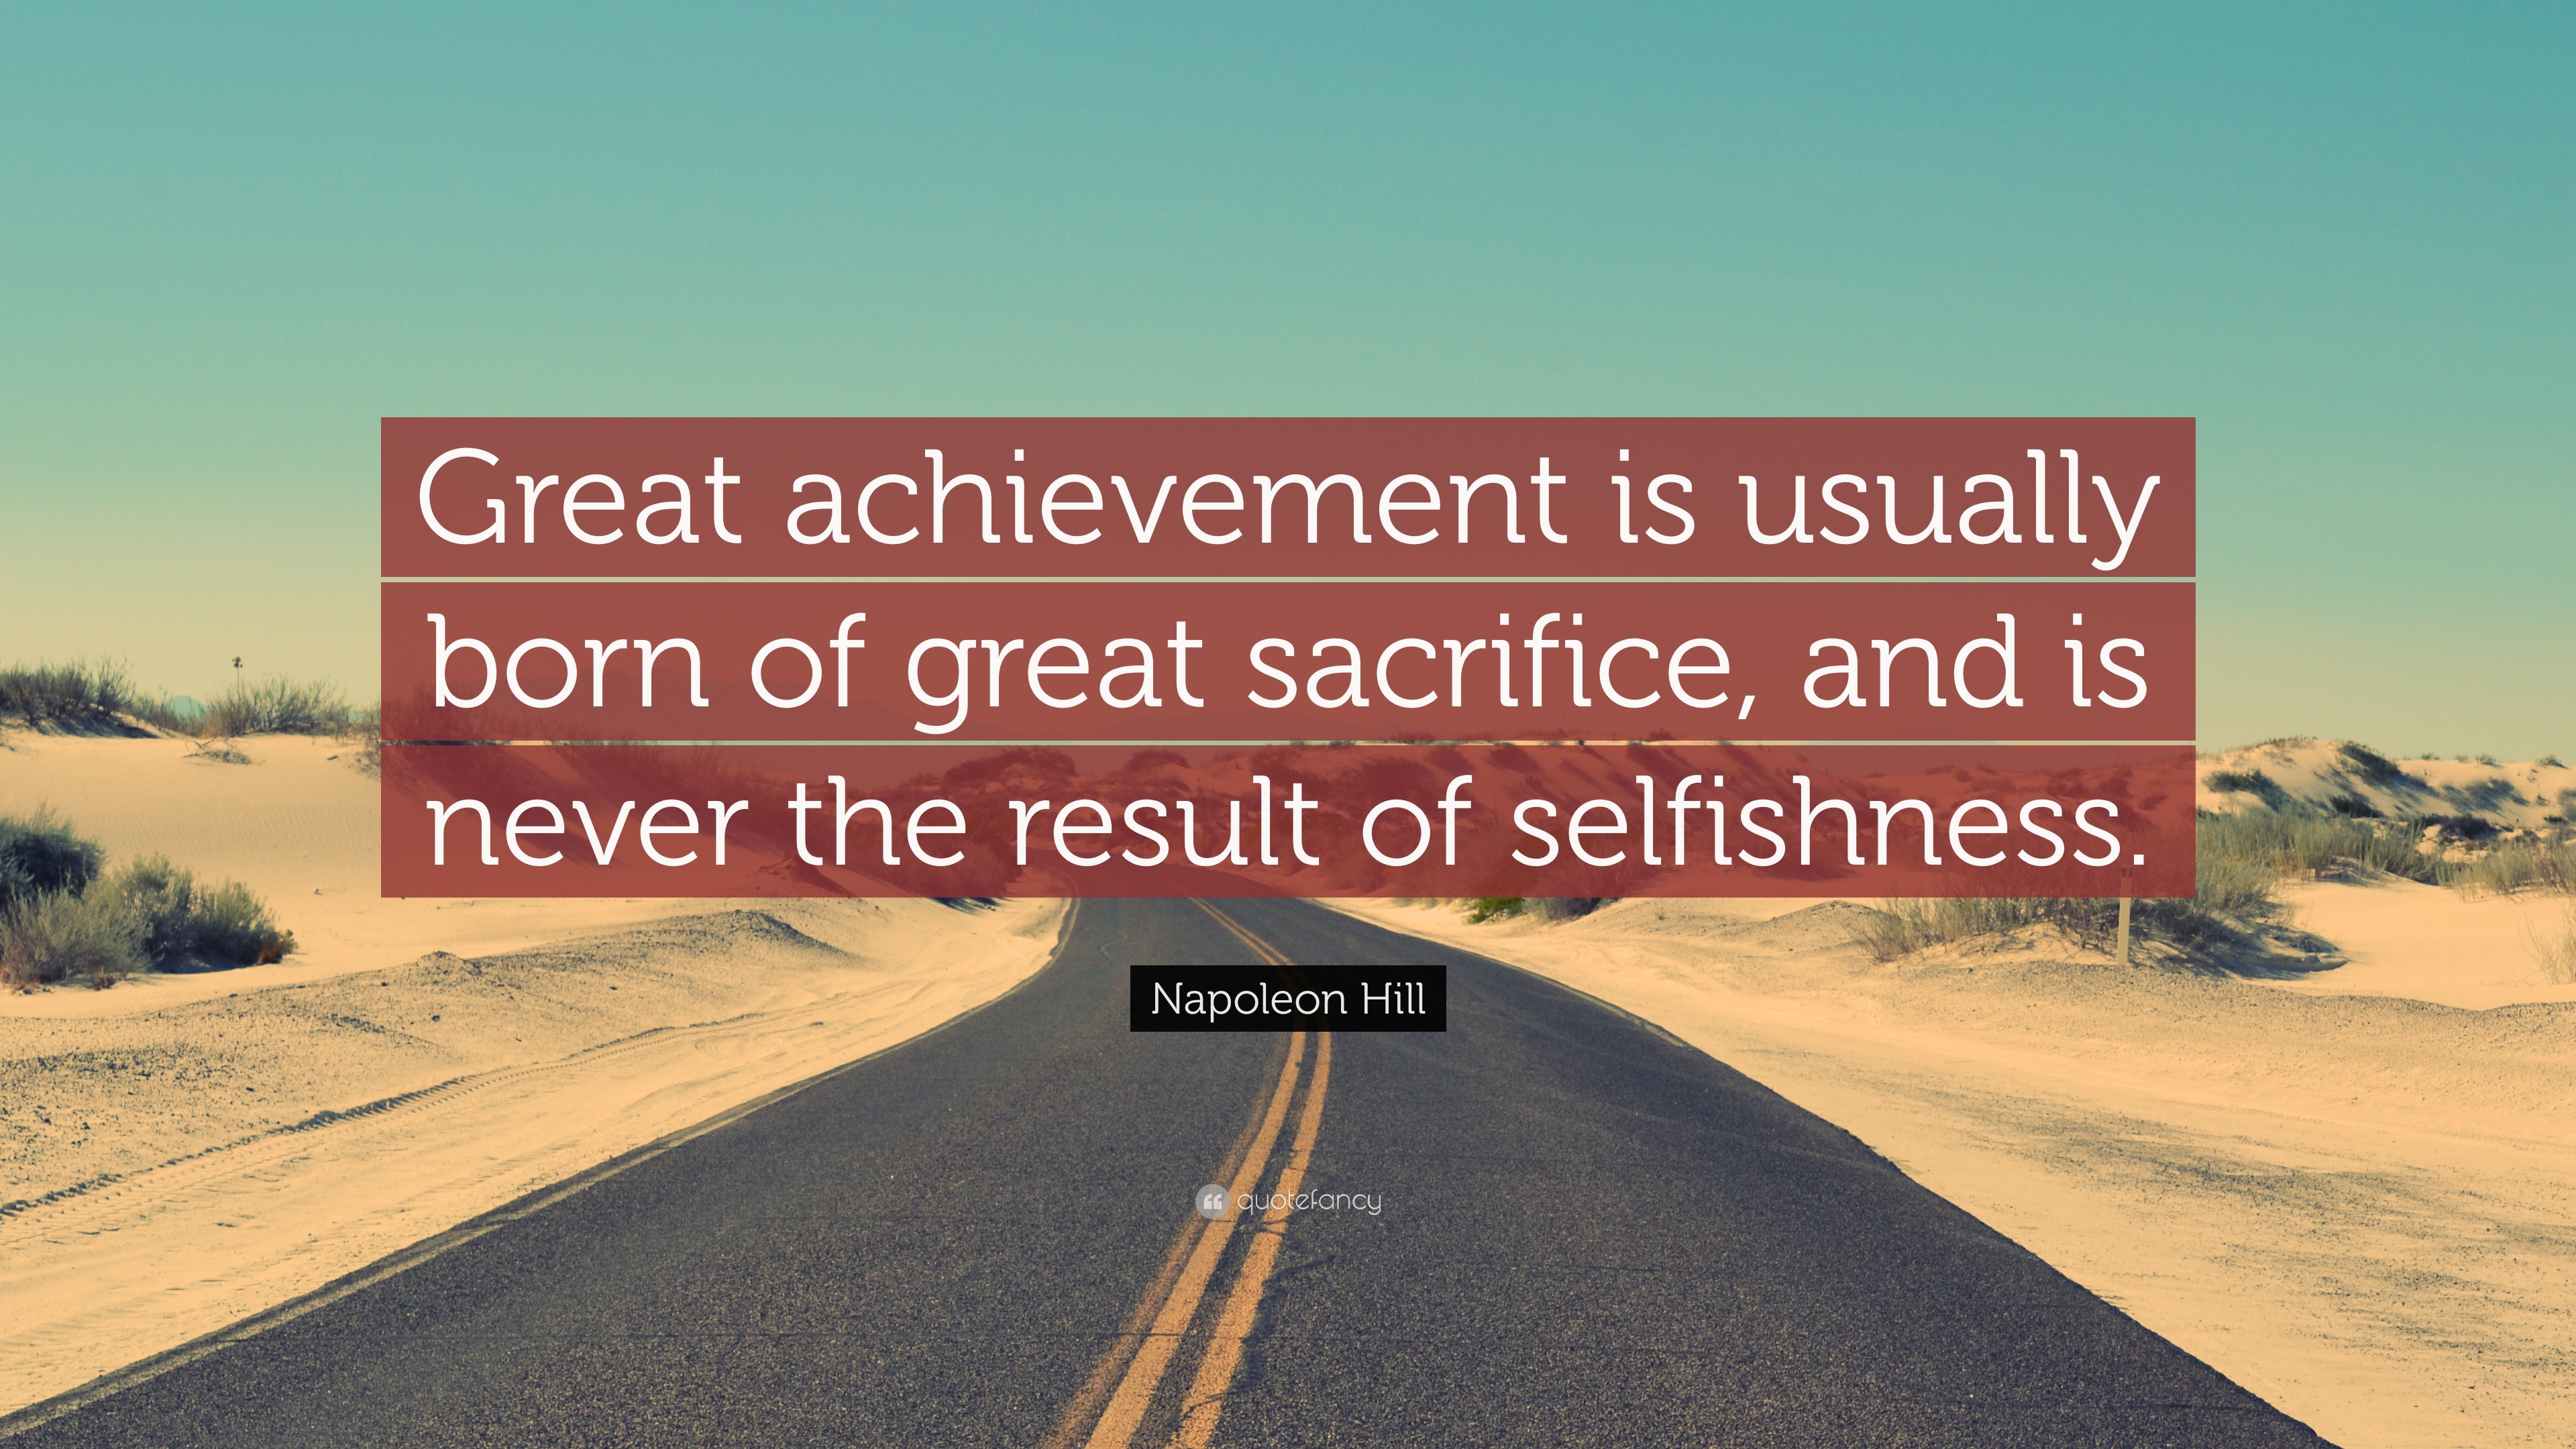 Napoleon Hill Quote: "Great achievement is usually born of ...